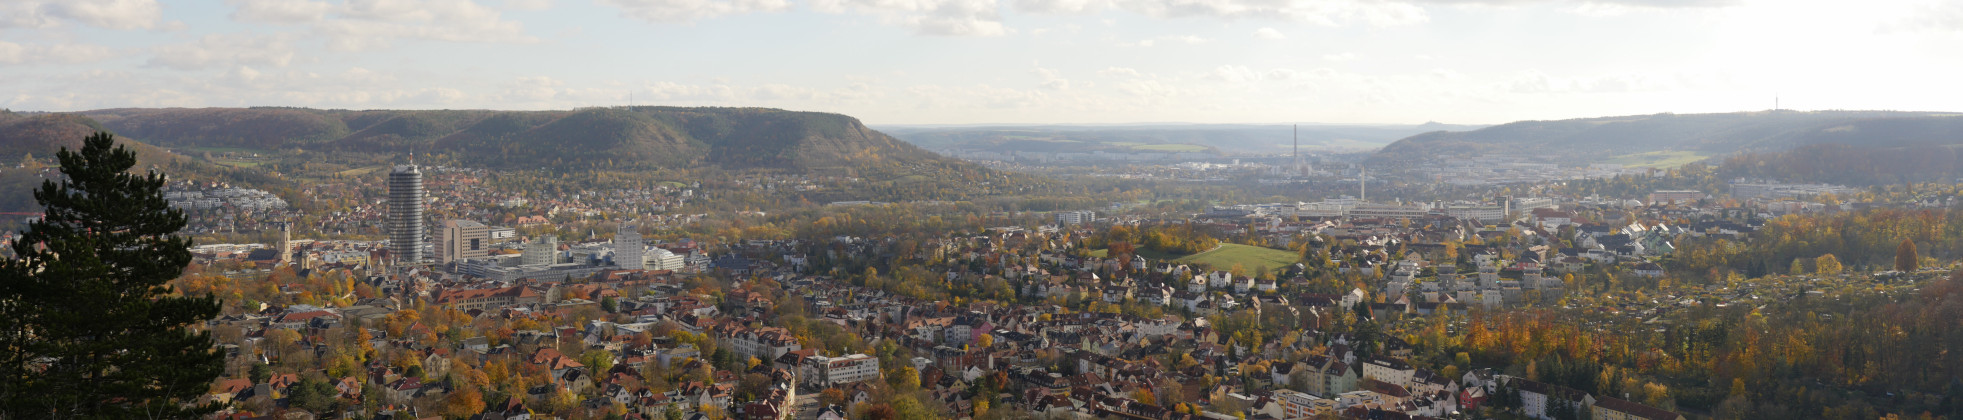 Panoramic view of central Jena from WNW, author: Torsten Löhne